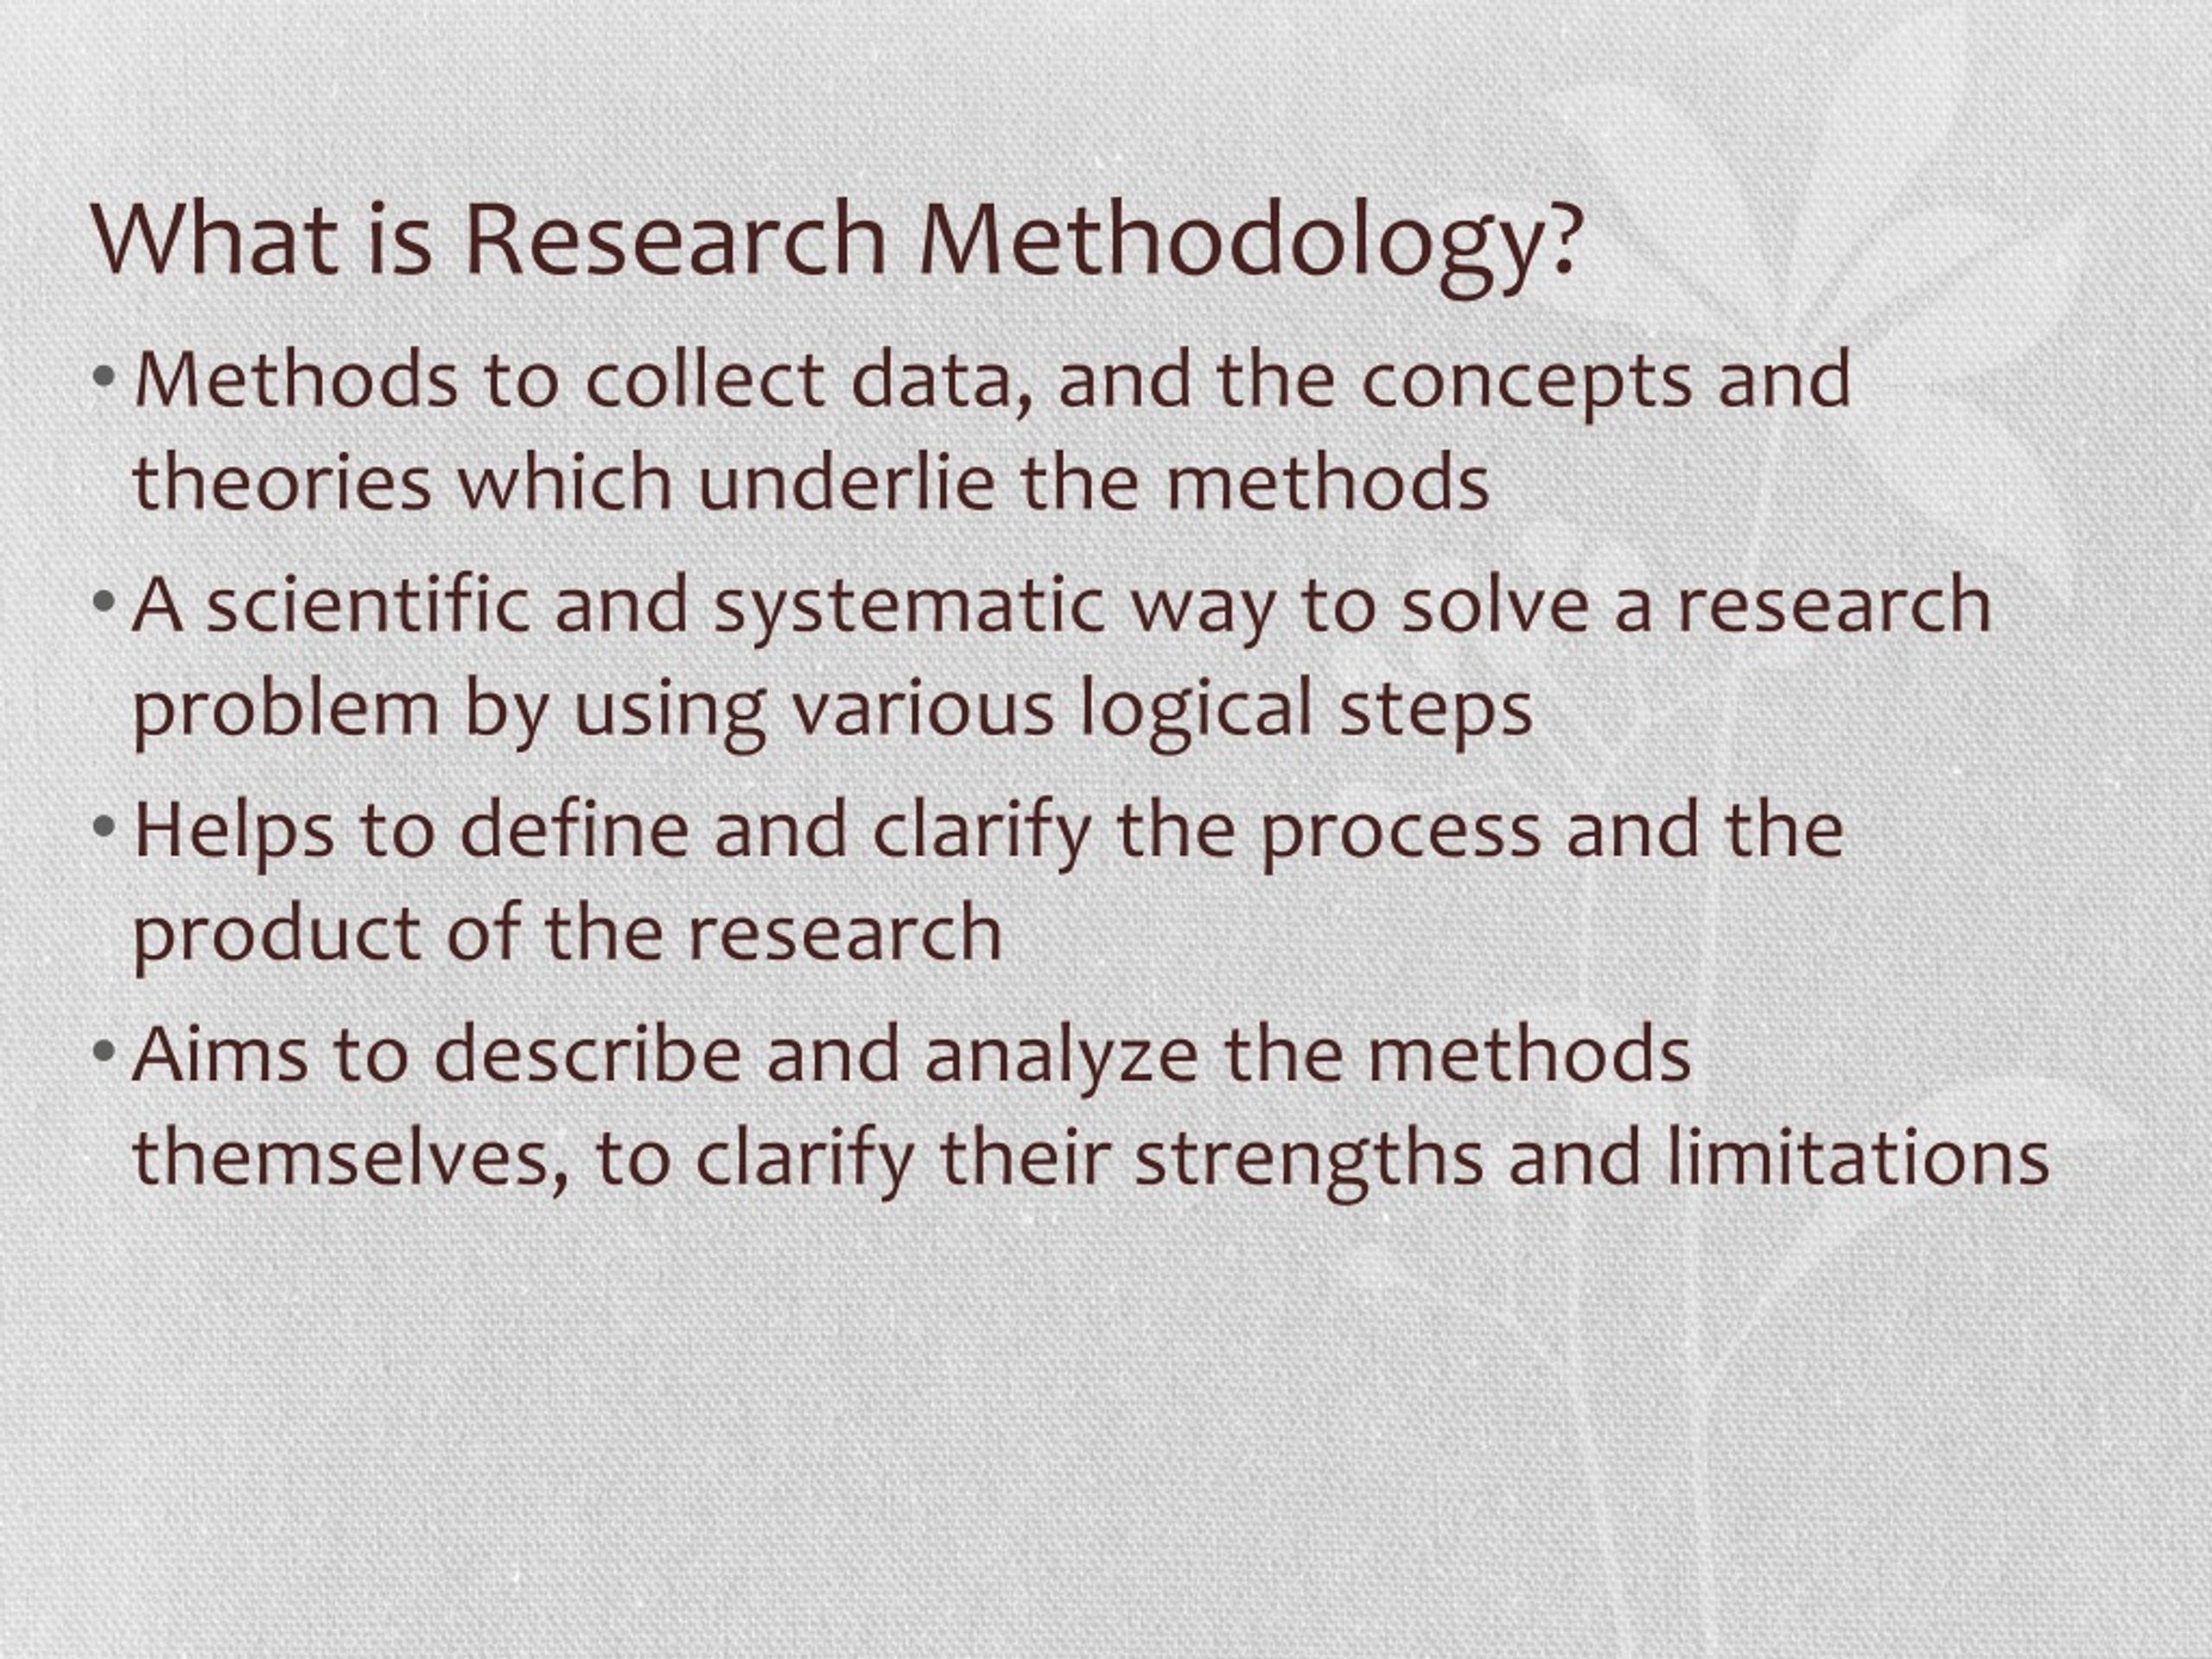 define research methodology meaning